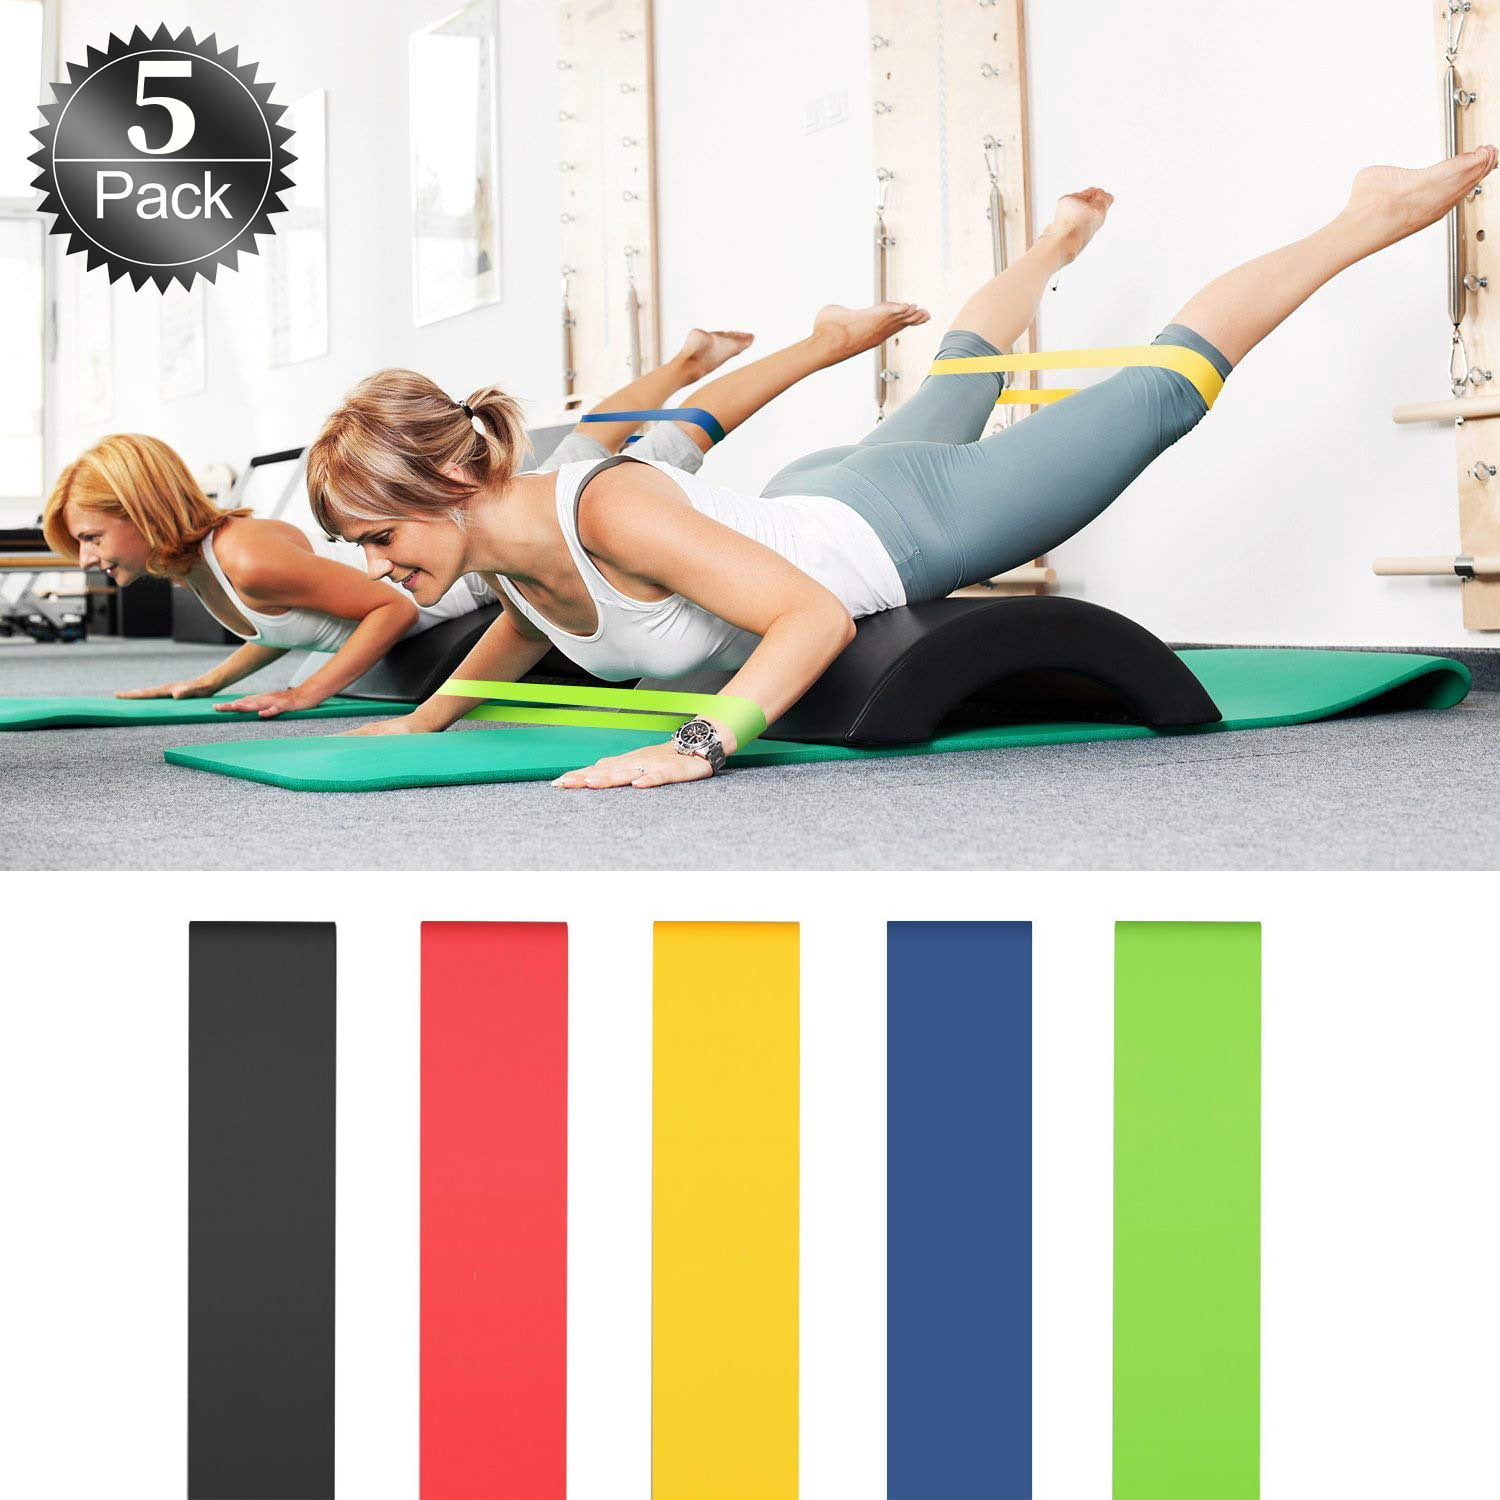 Pack of 5 Resistance Loop Exercise Bands Workout Fitness Yoga Crossfit Strength 